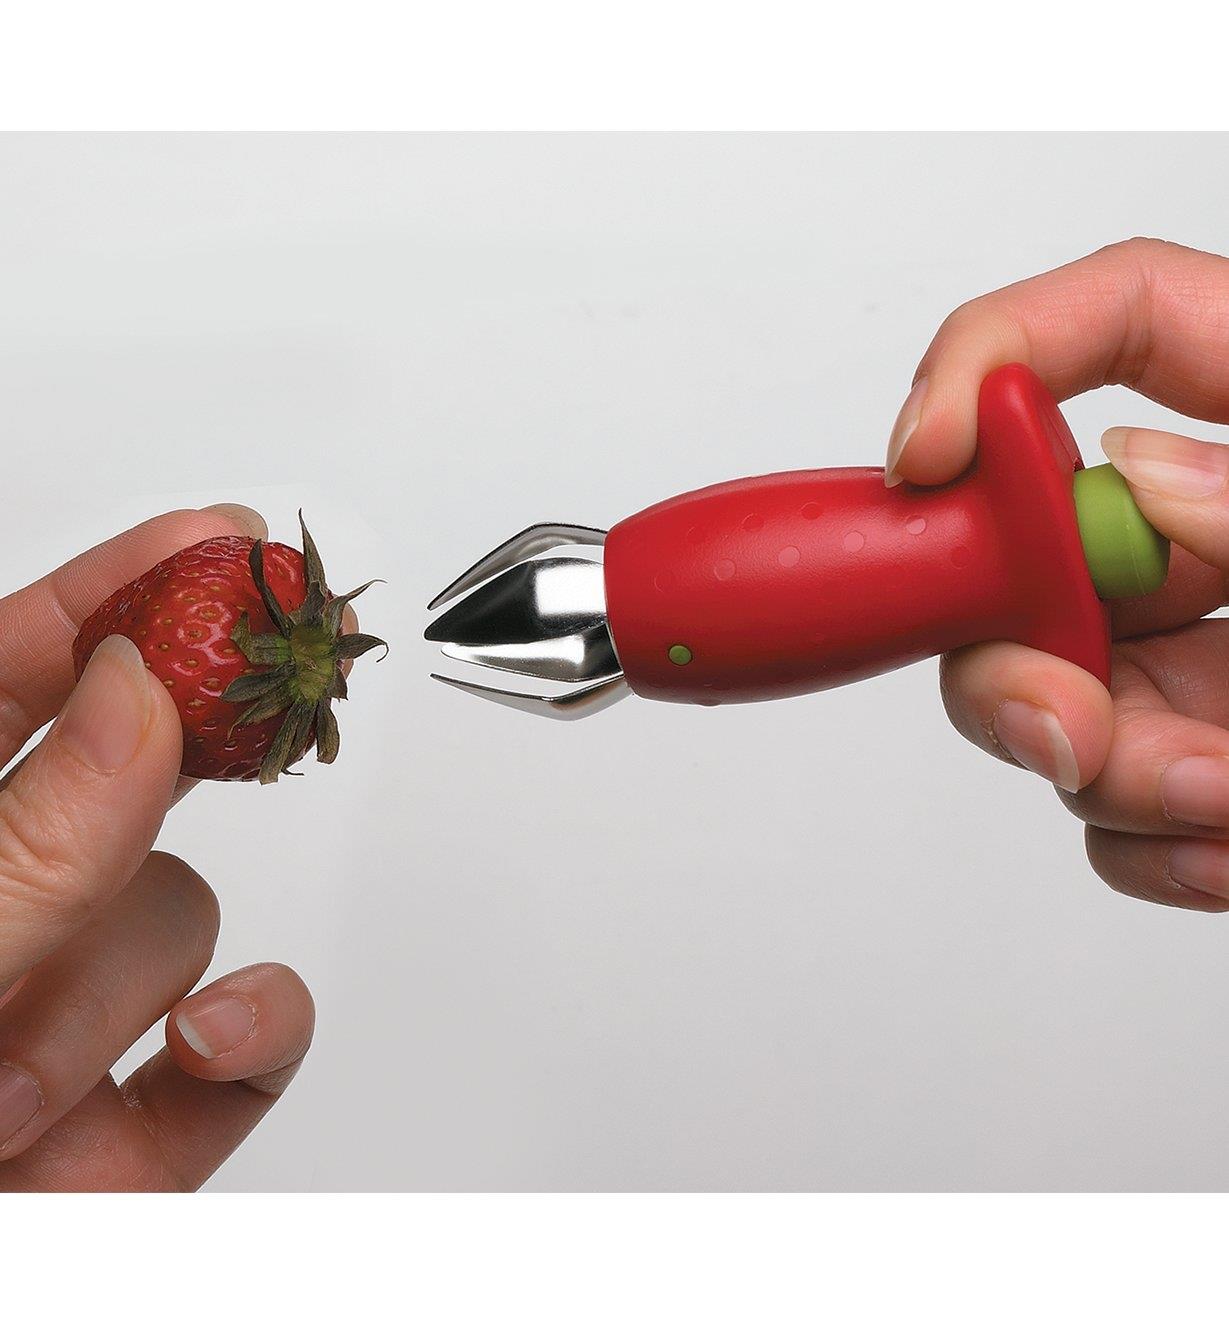 Pressing the rear button on the Strawberry Huller to open the jaws in preparation for hulling a strawberry